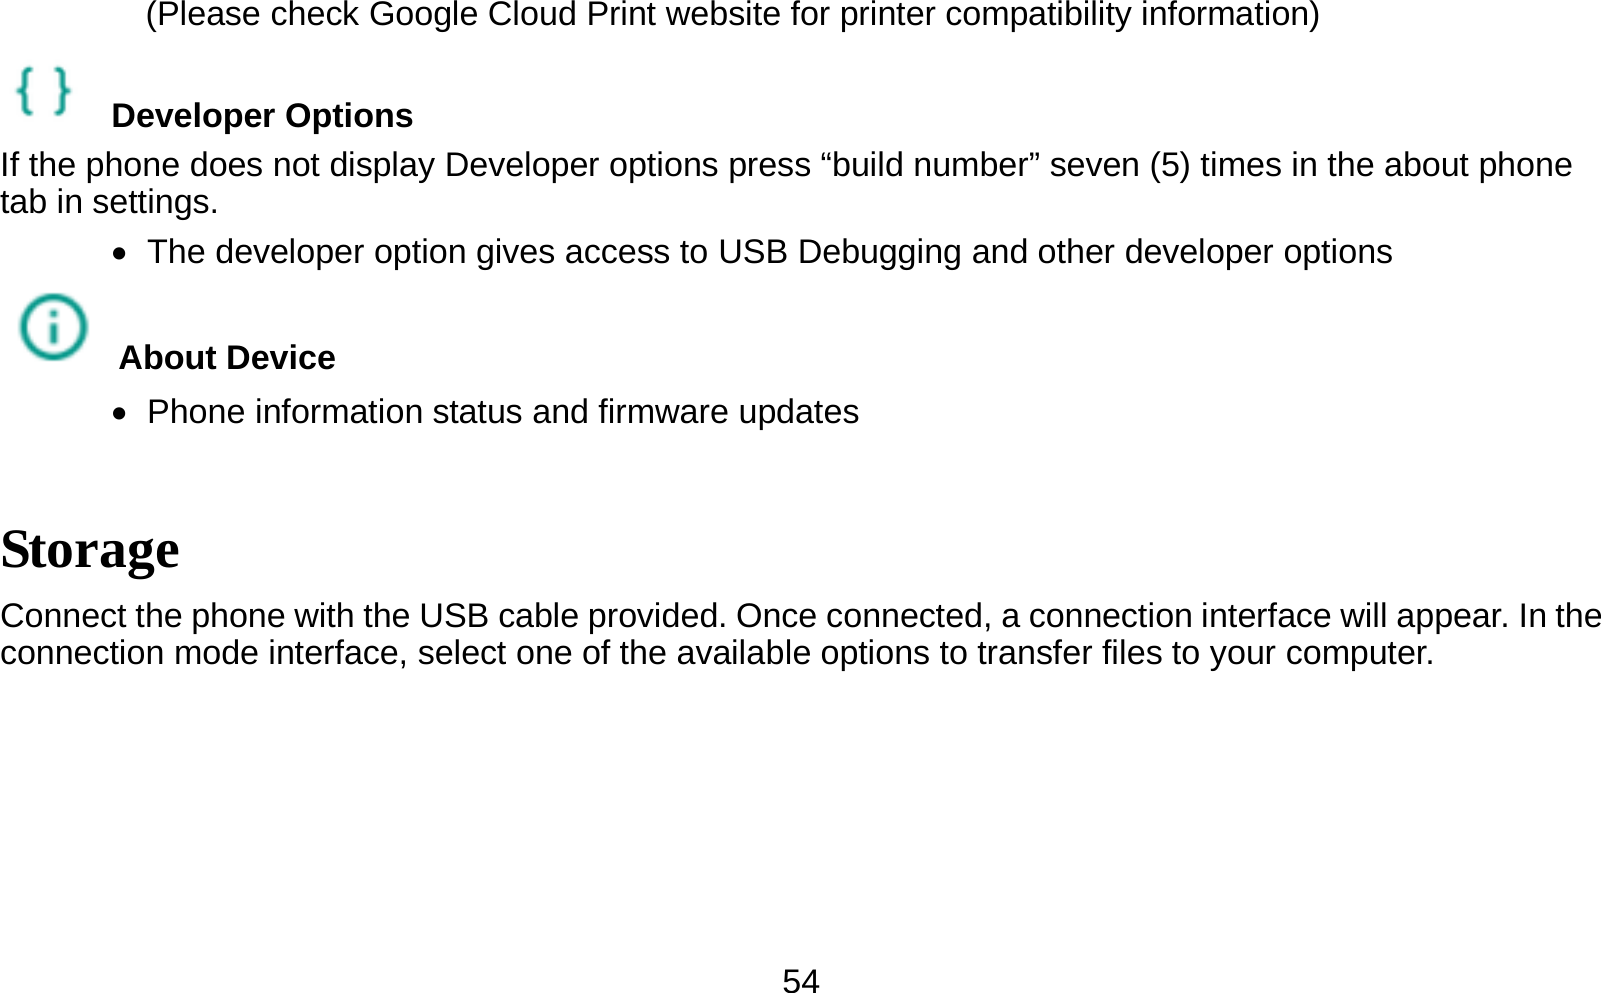   54    (Please check Google Cloud Print website for printer compatibility information)    Developer Options  If the phone does not display Developer options press “build number” seven (5) times in the about phone tab in settings.      The developer option gives access to USB Debugging and other developer options  About Device     Phone information status and firmware updates Storage Connect the phone with the USB cable provided. Once connected, a connection interface will appear. In the connection mode interface, select one of the available options to transfer files to your computer.   